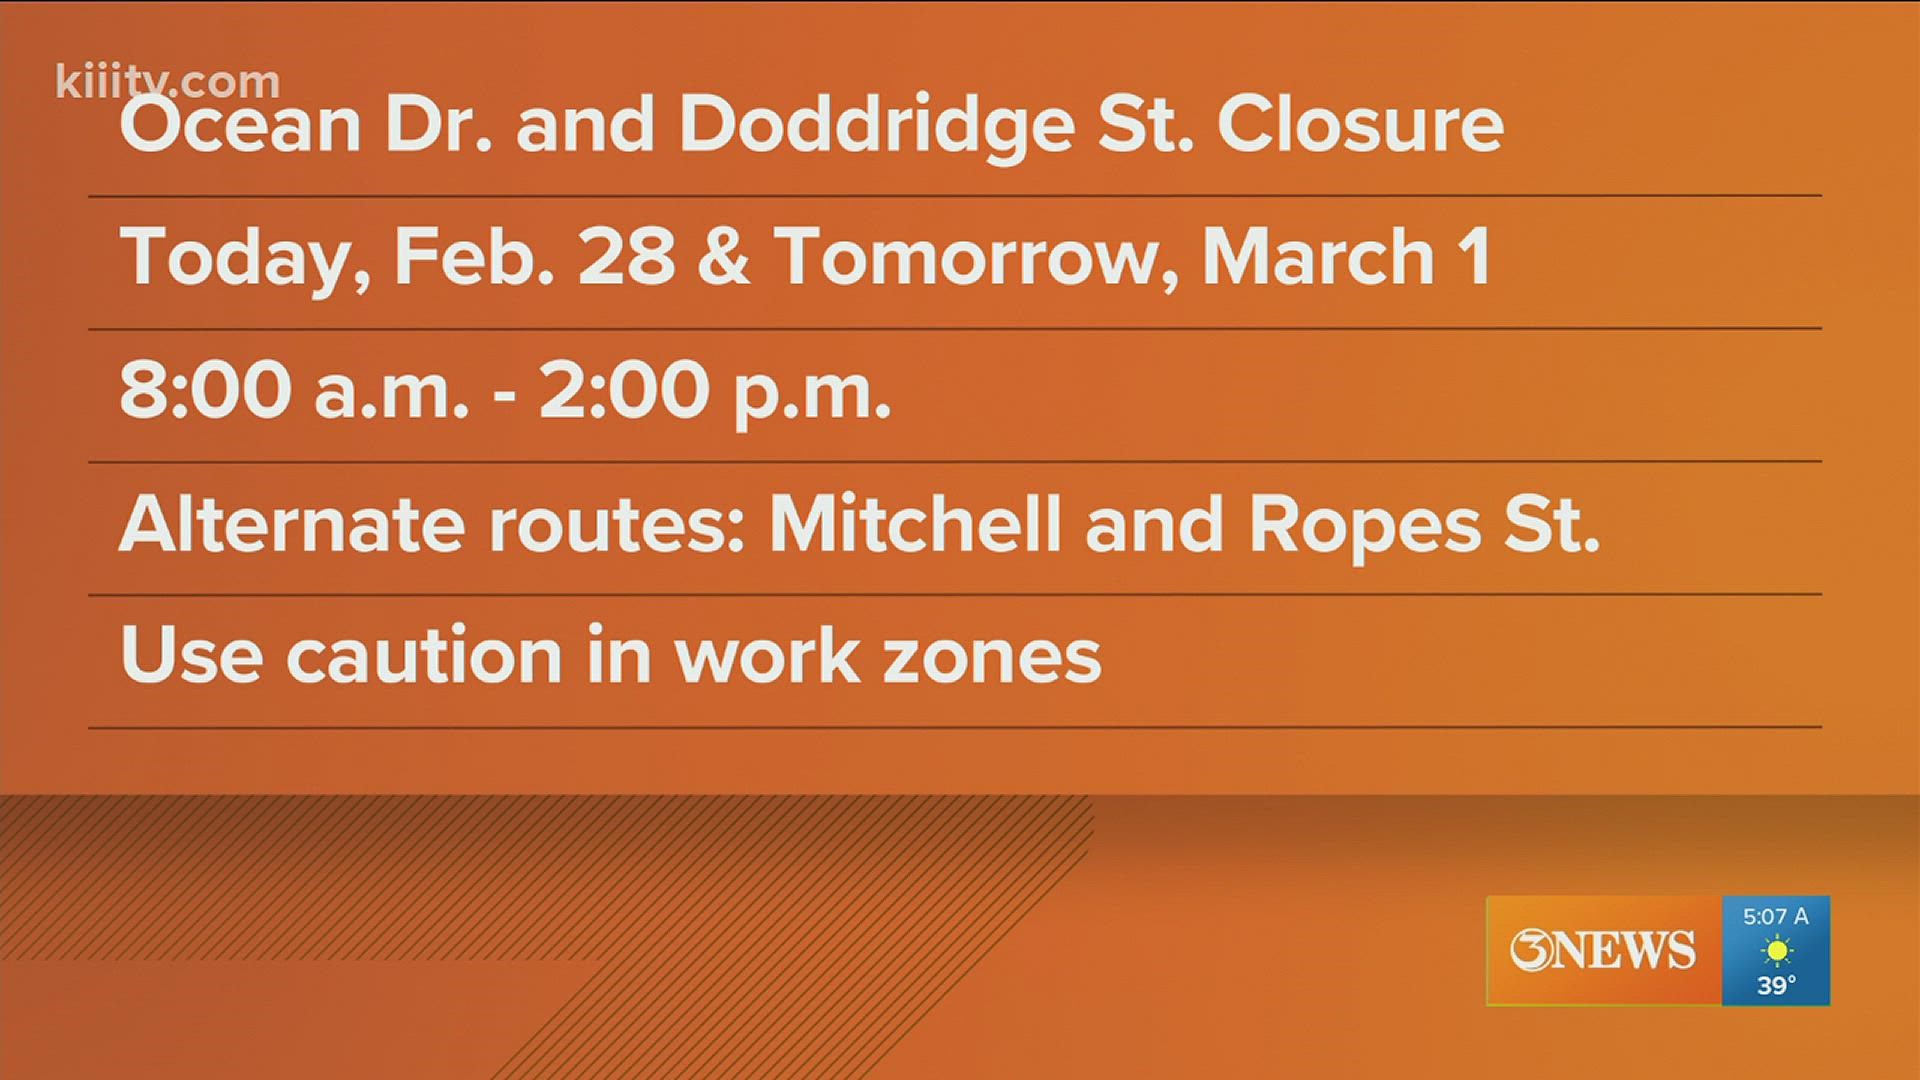 Contractors will be completing the installation of the final riding surface on the south bound lanes of Ocean Dr.